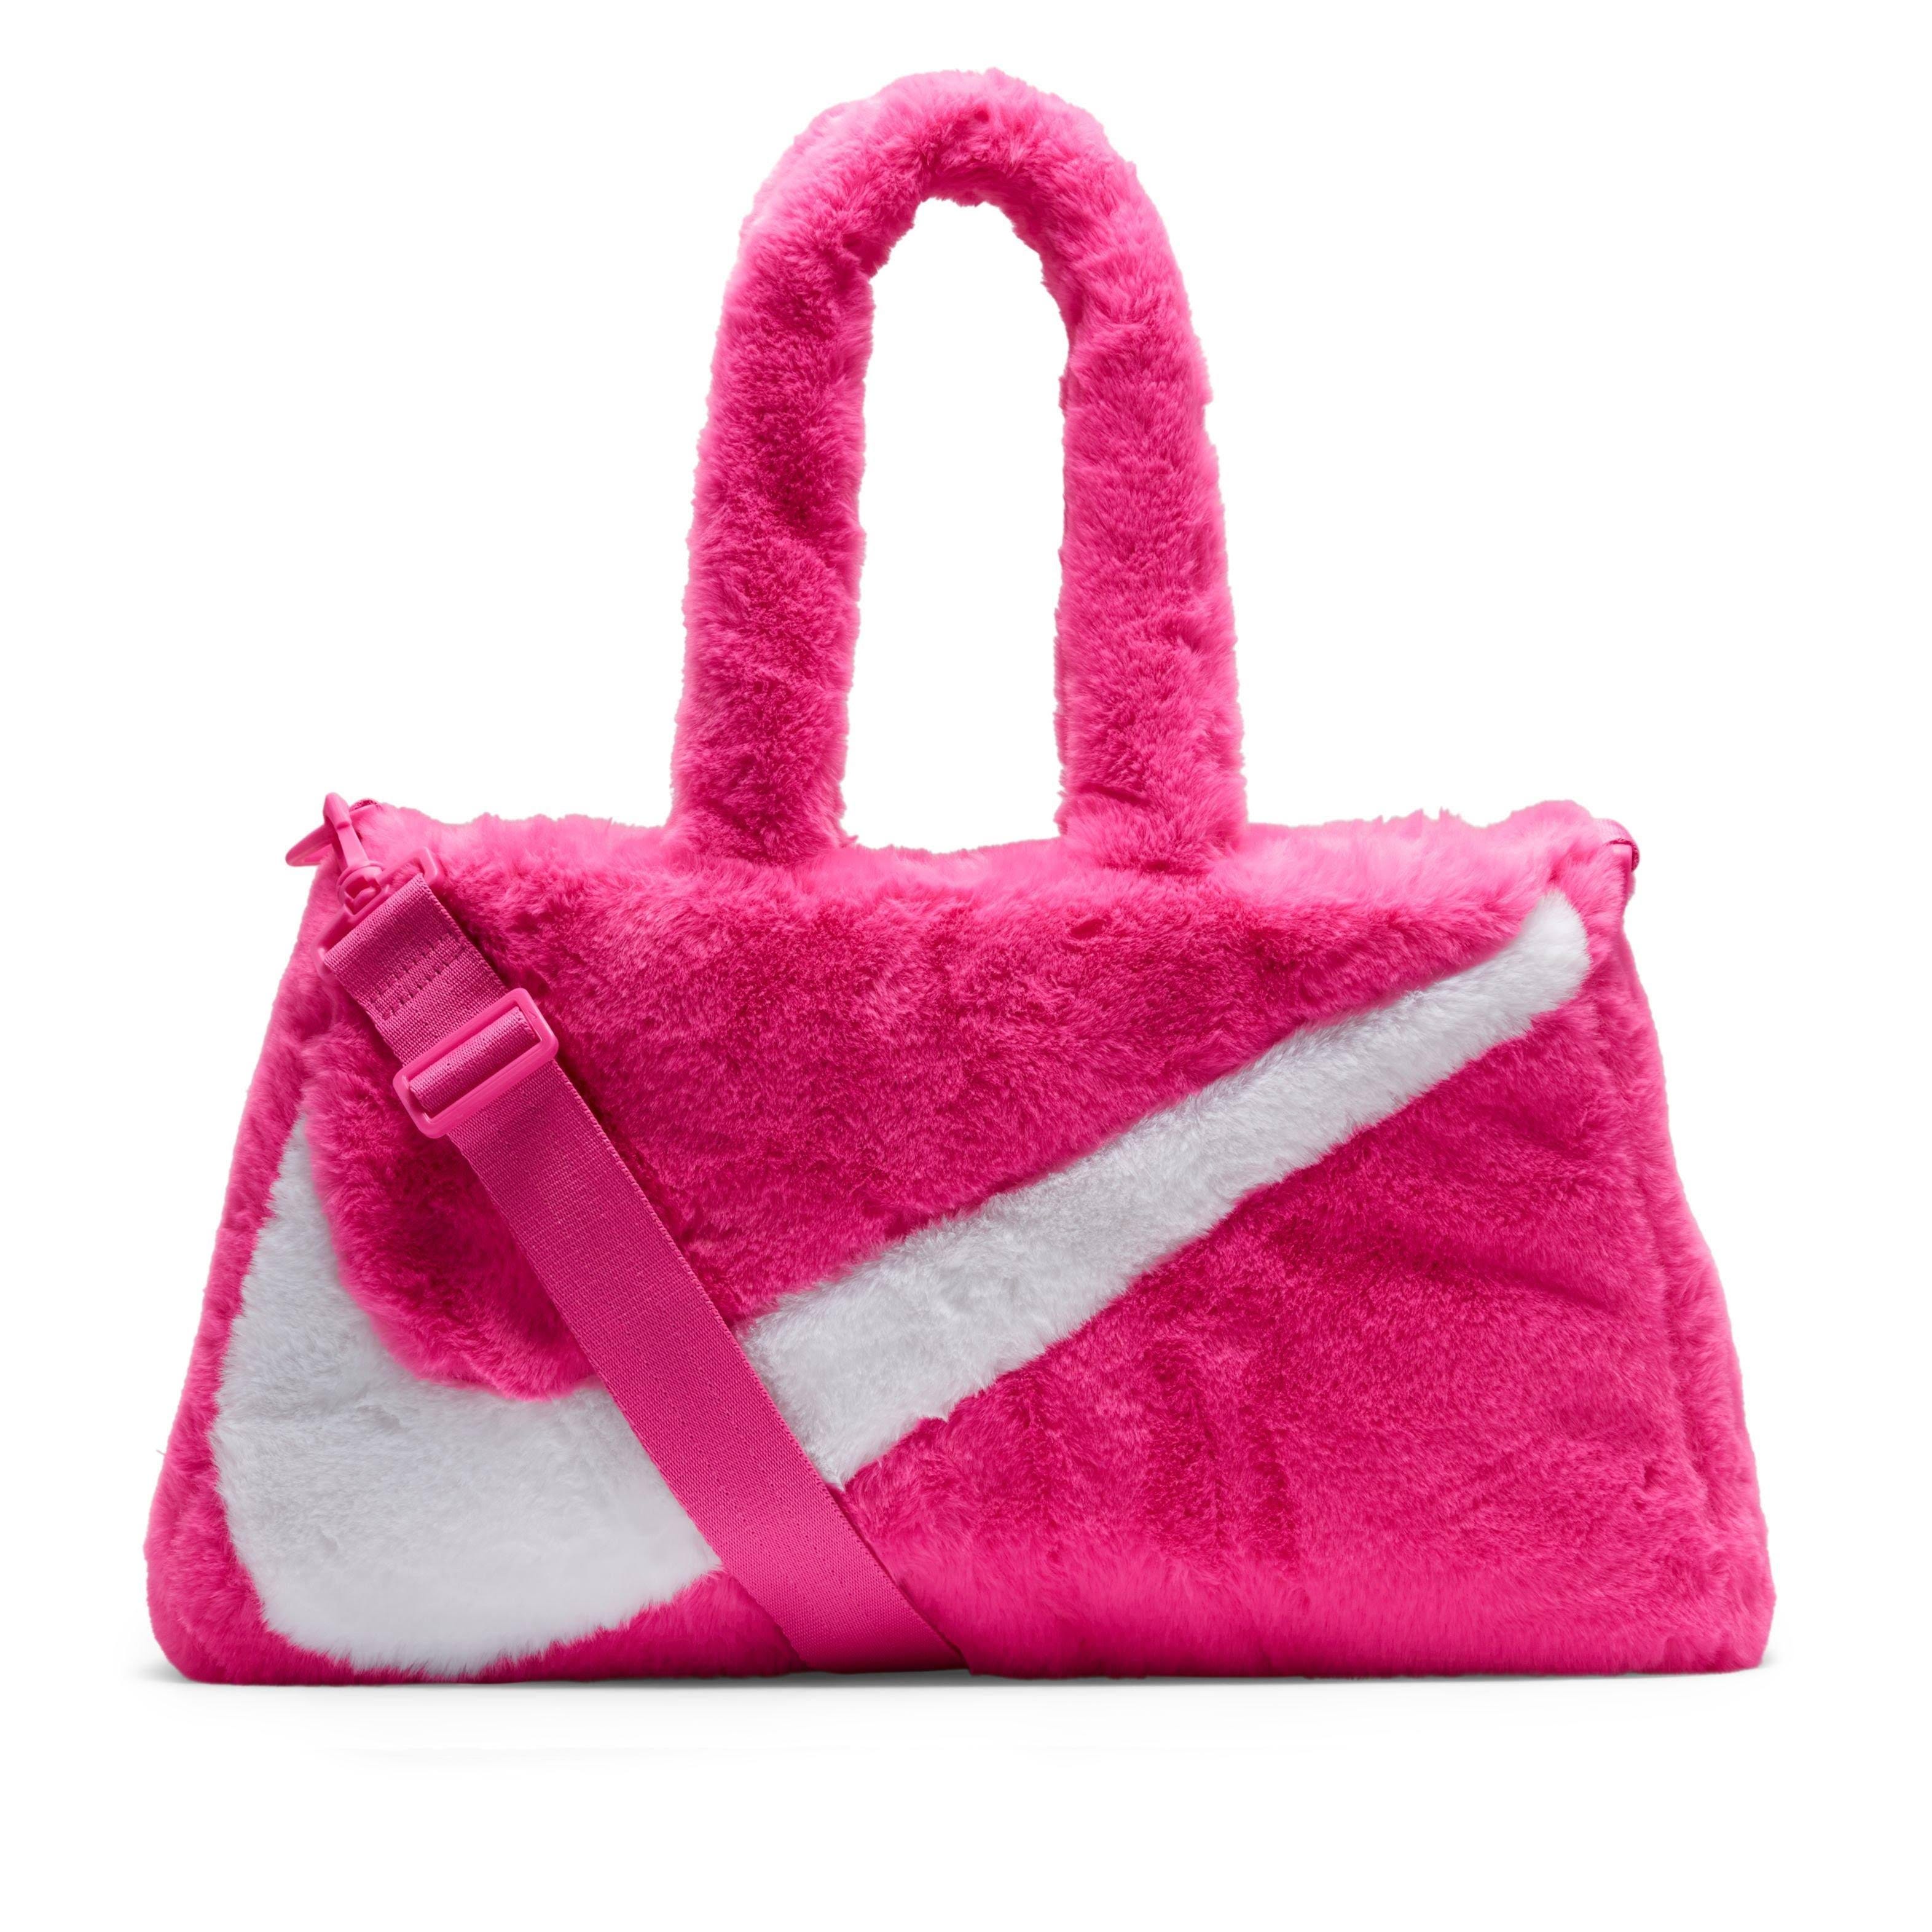 Pink Faux Fur Tote Bag from Nike Sportswear - Chic and Stylish with Inner Zip Pocket | Image